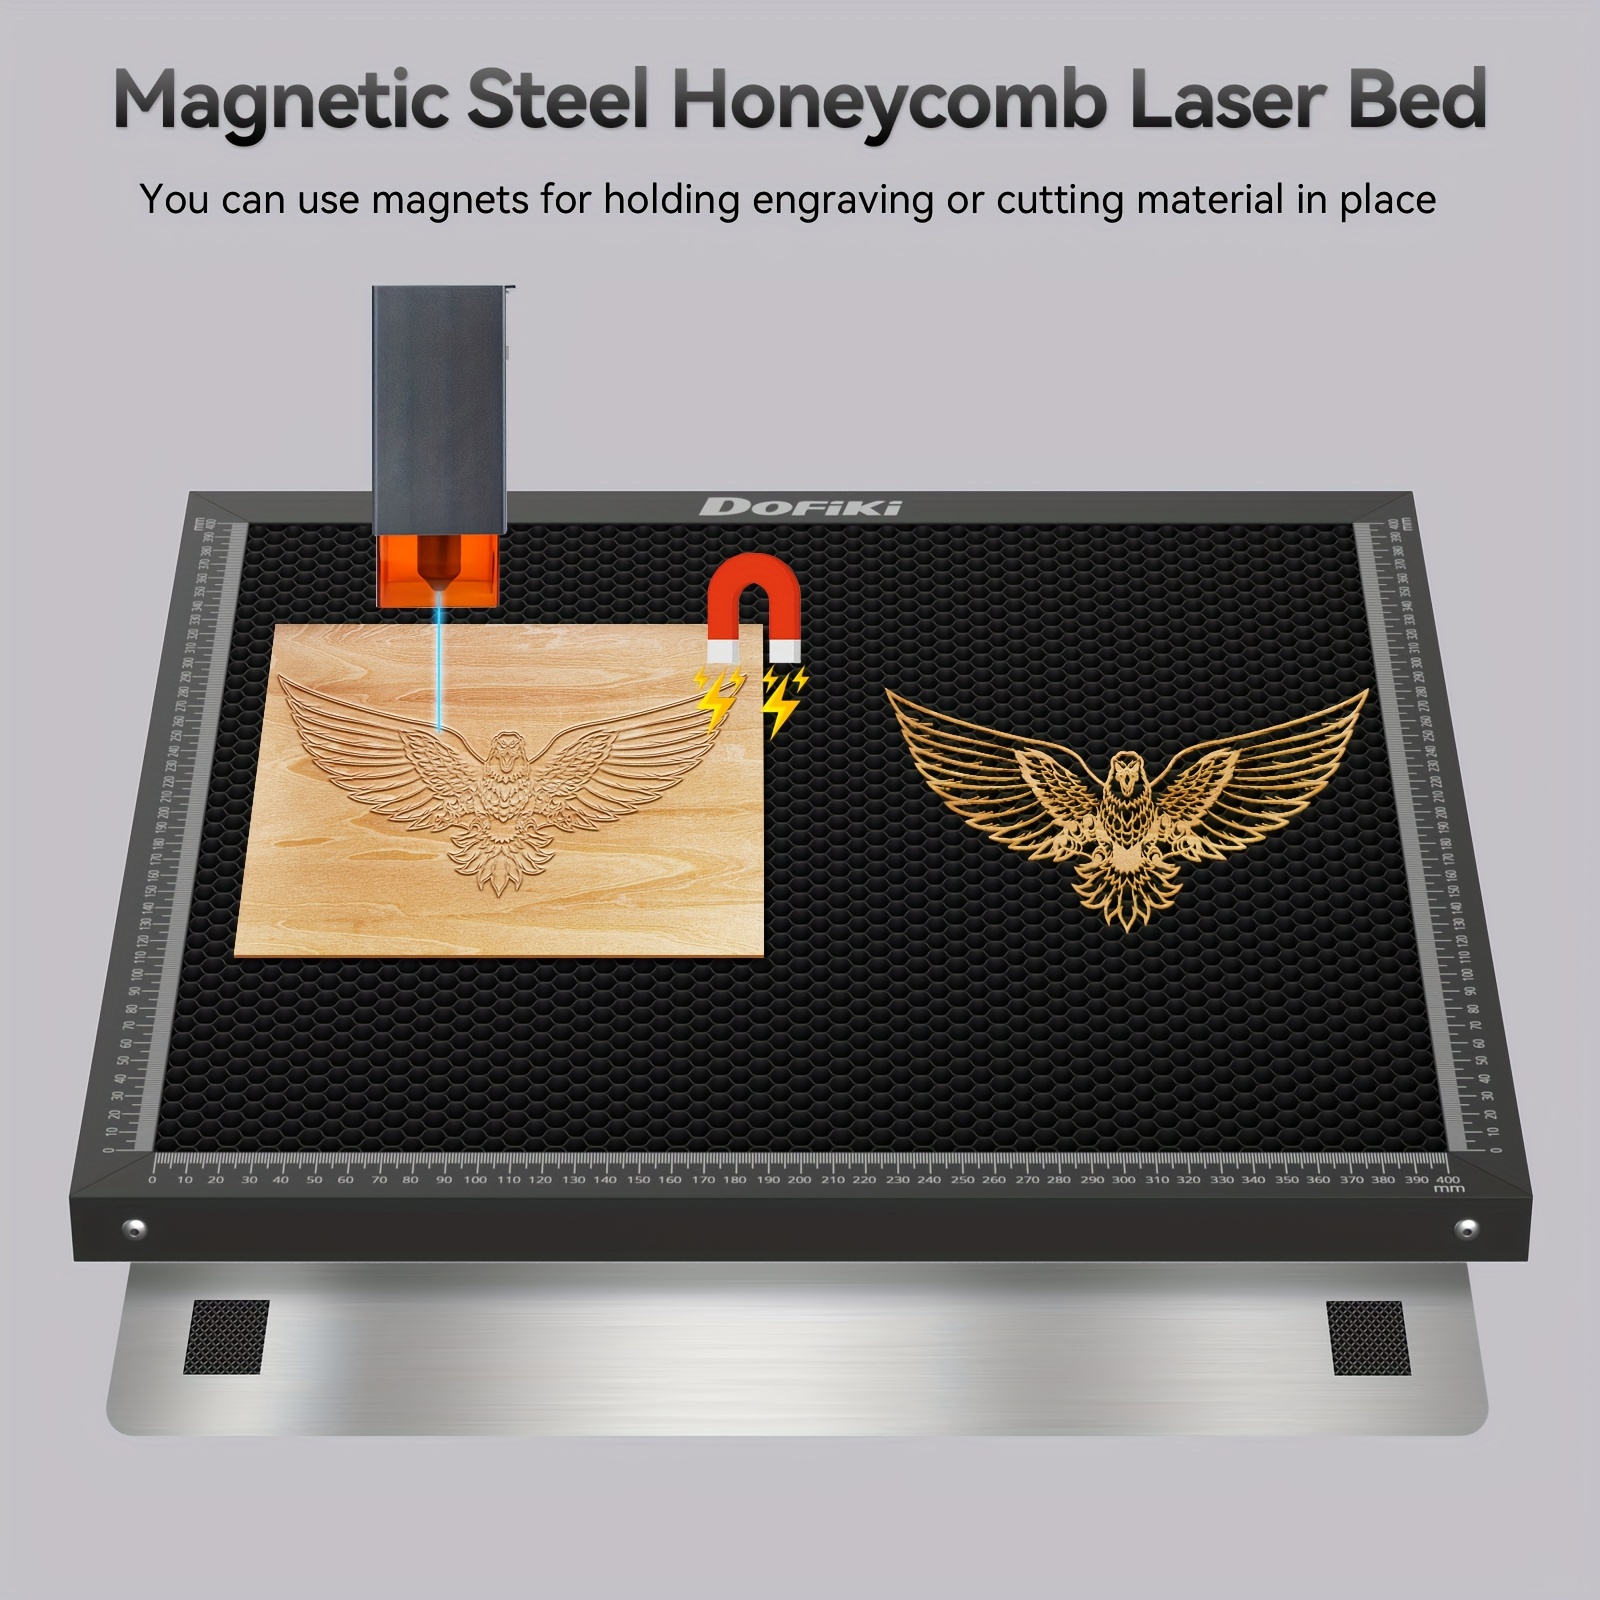 Laser Honeycomb Bed, 400 x 400mm Aluminum Honeycomb Working Table for Laser Engraver/Cutting for Dissipating Heat for Your Engraving,Laser Engraver